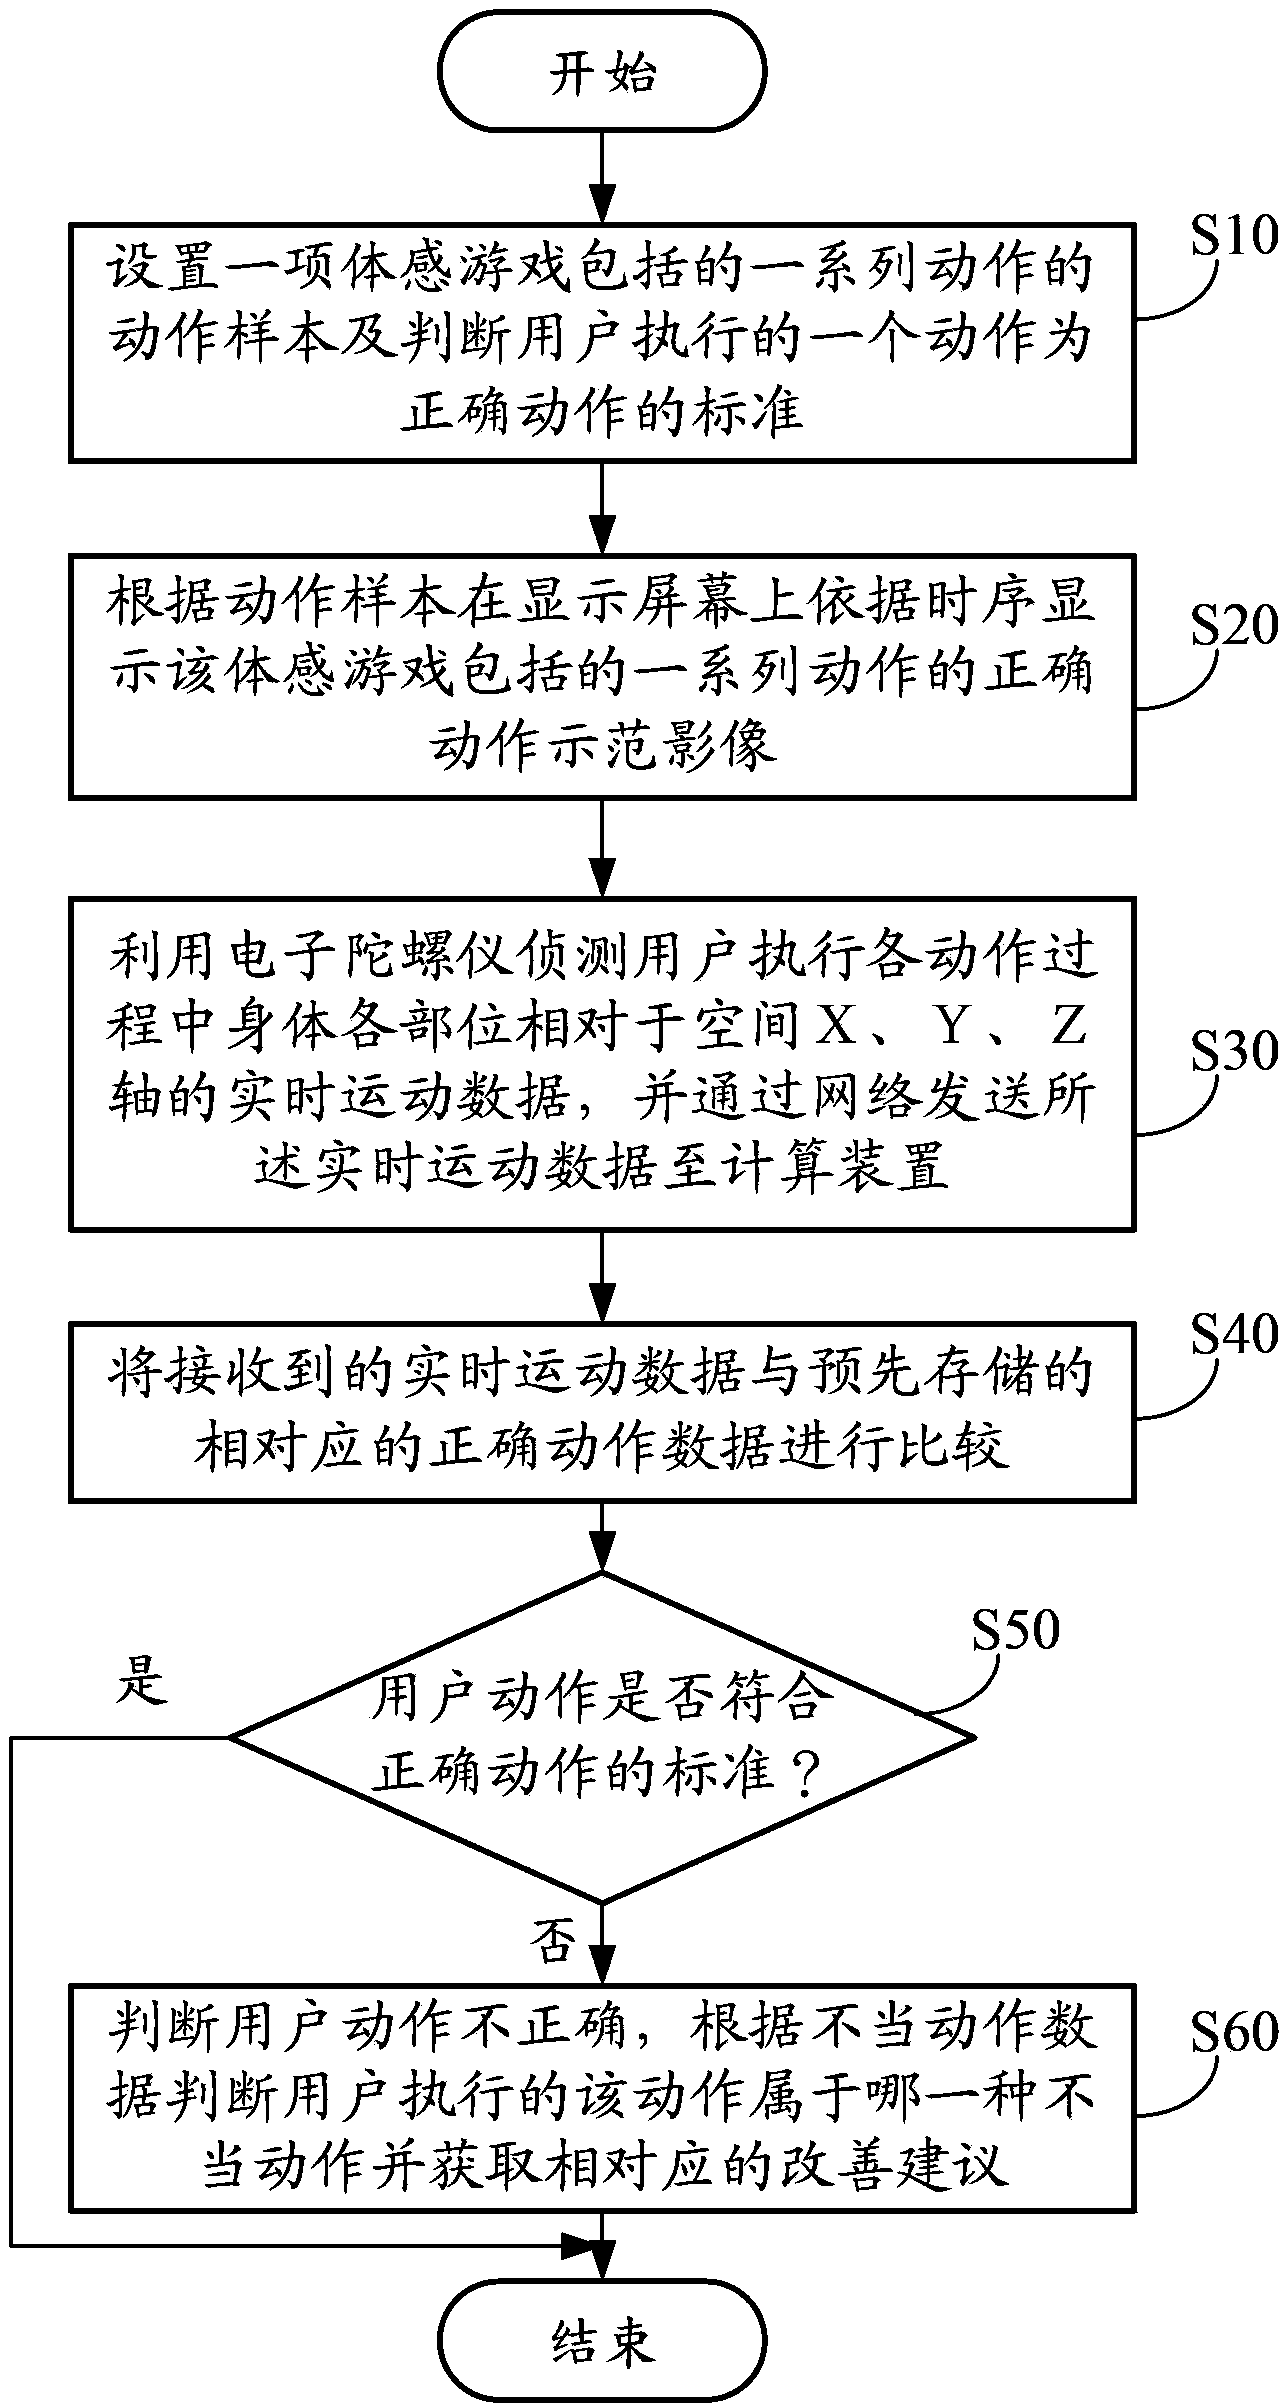 Method and system for motion guidance of motion sensing game